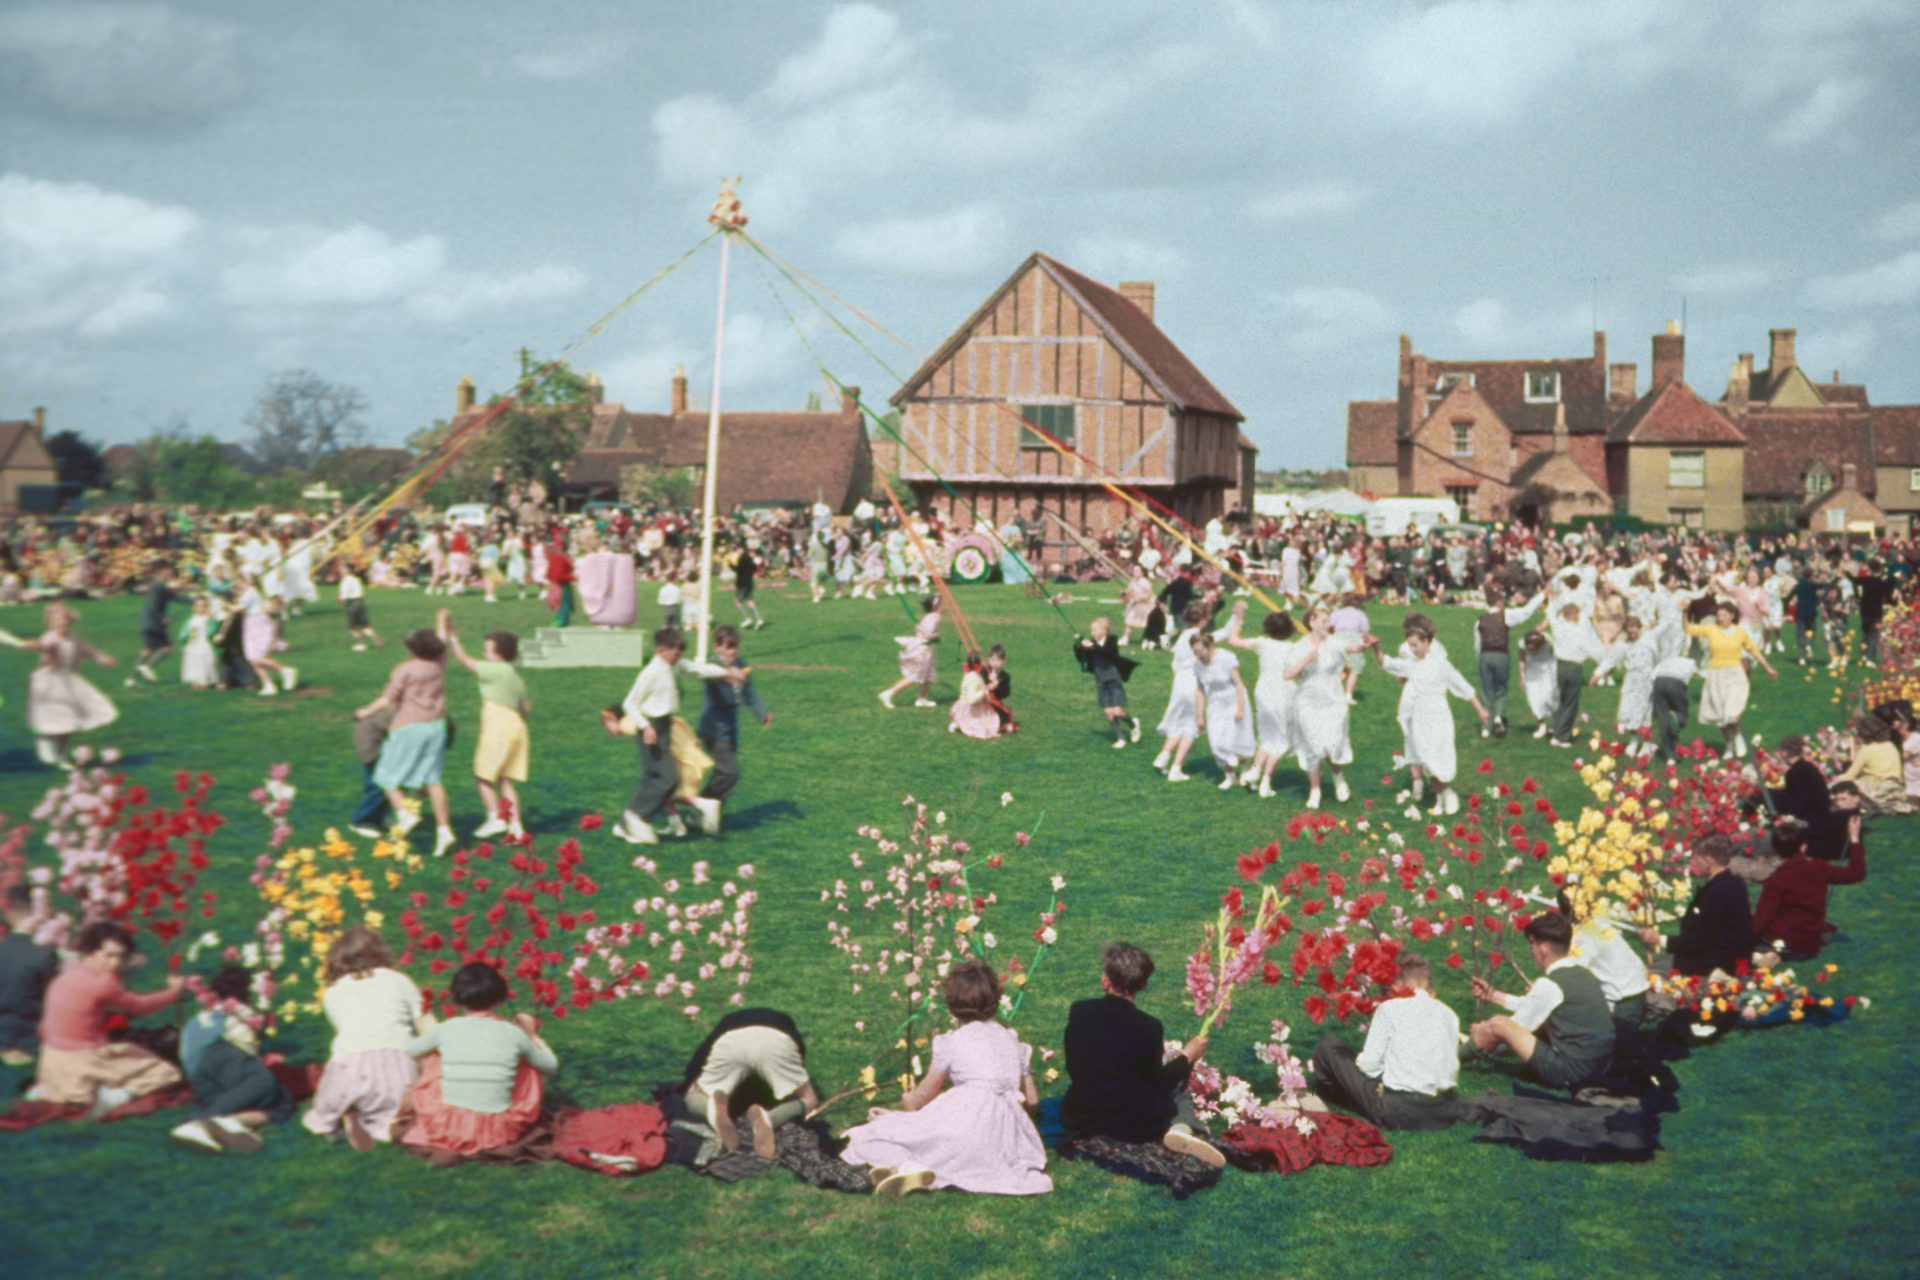 Strange British traditions. May Day in great Britain with singing and Dancing Round a Maypole..